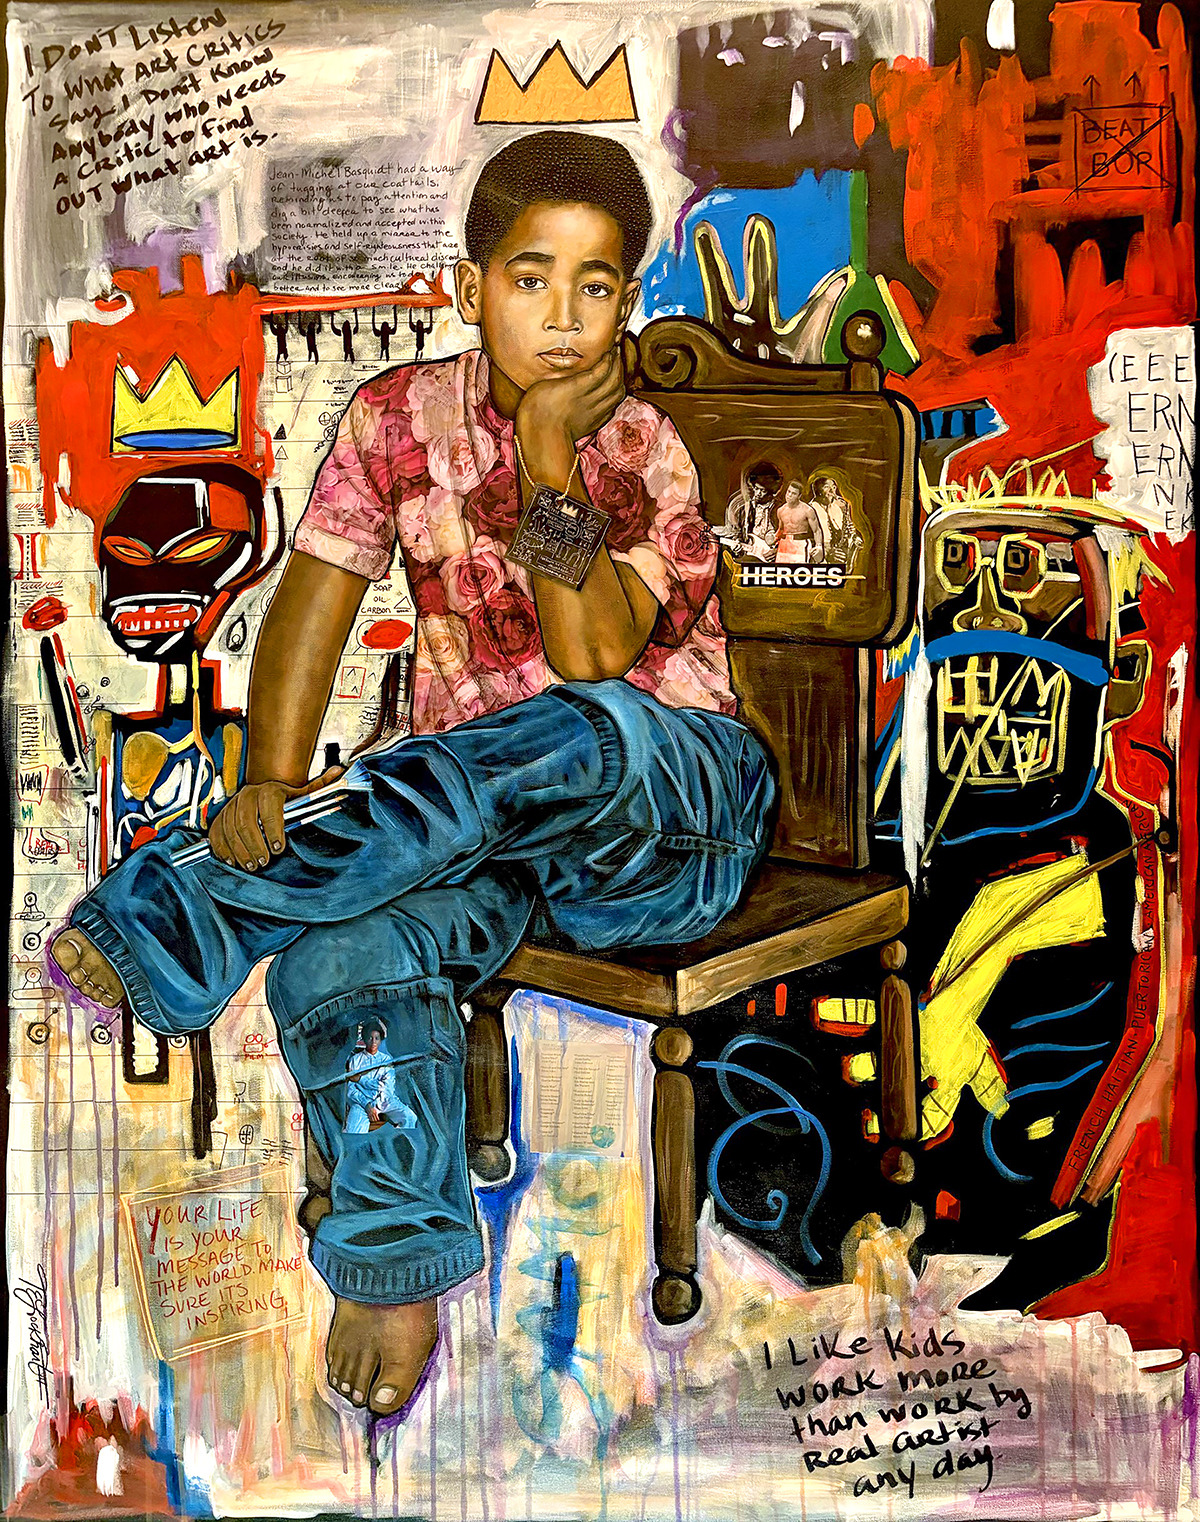 Roses for a king basquiat small fvag0j